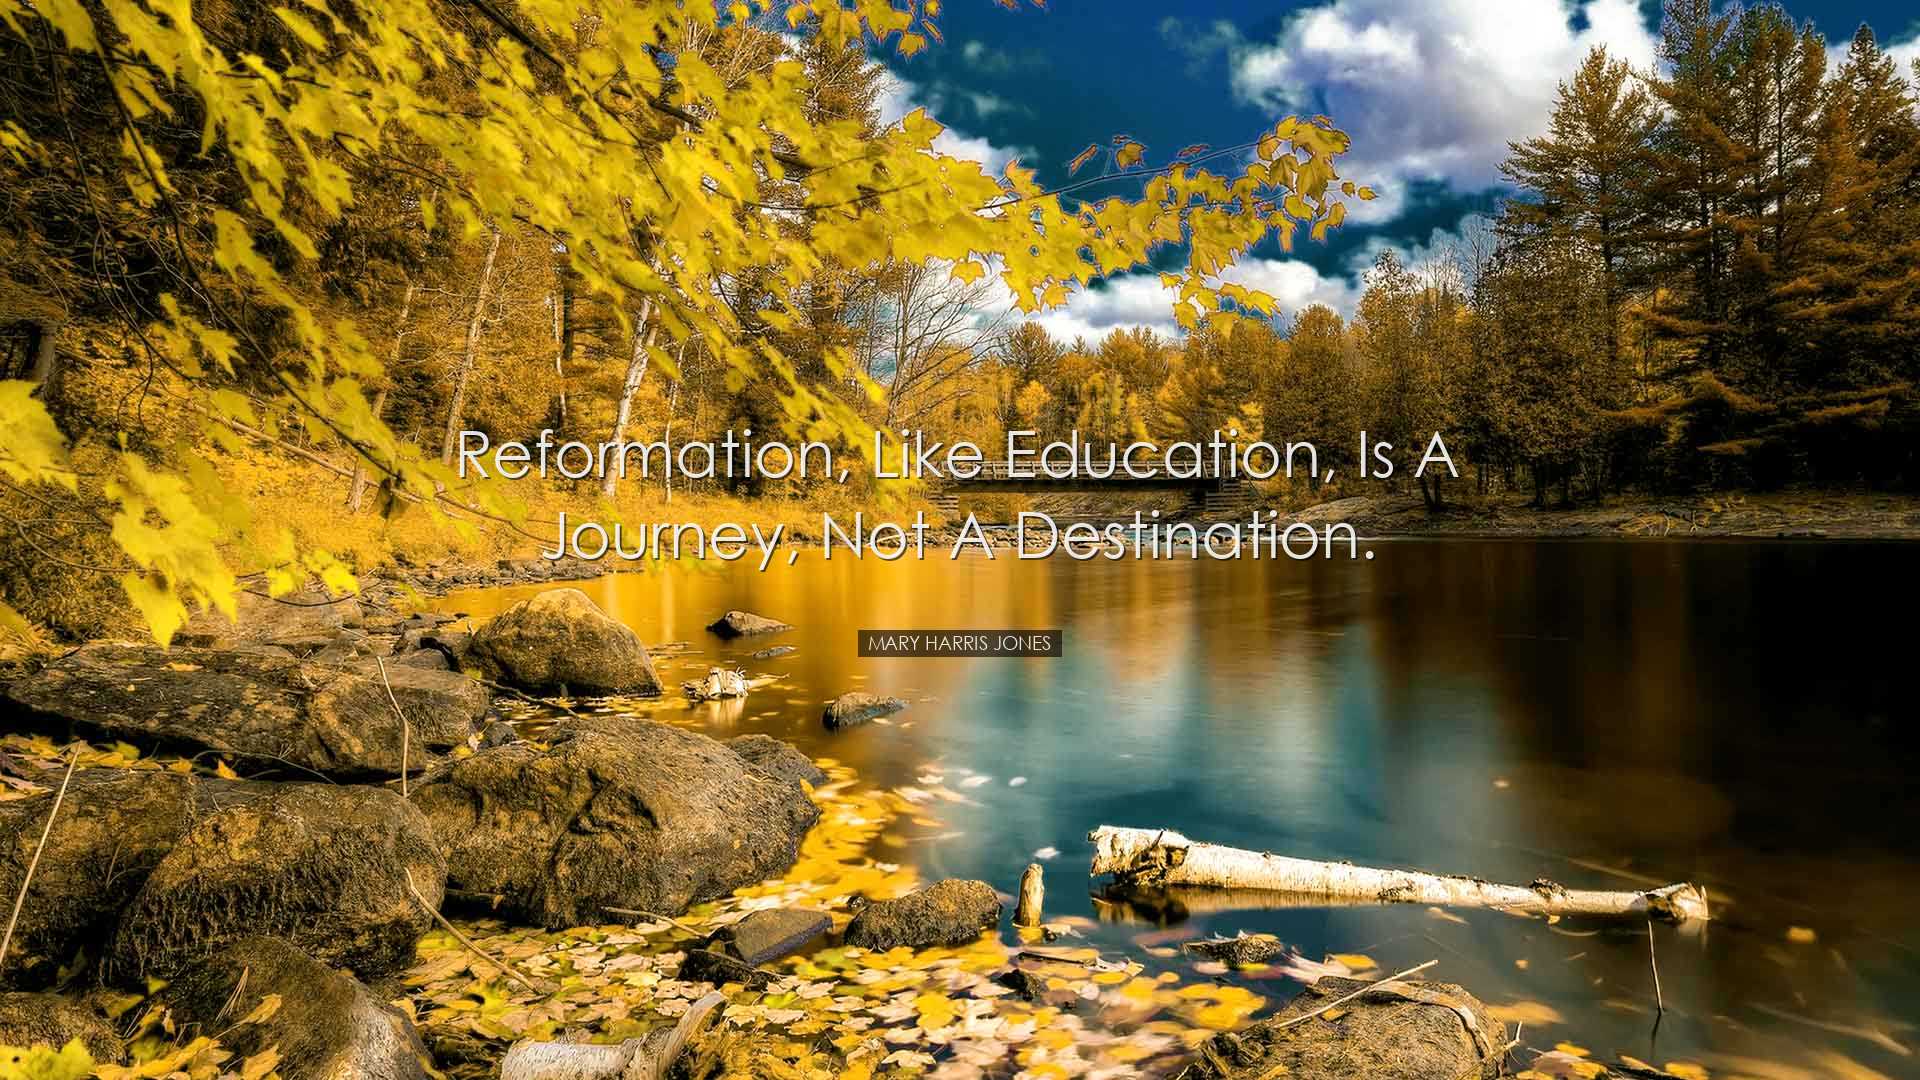 Reformation, like education, is a journey, not a destination. - Ma